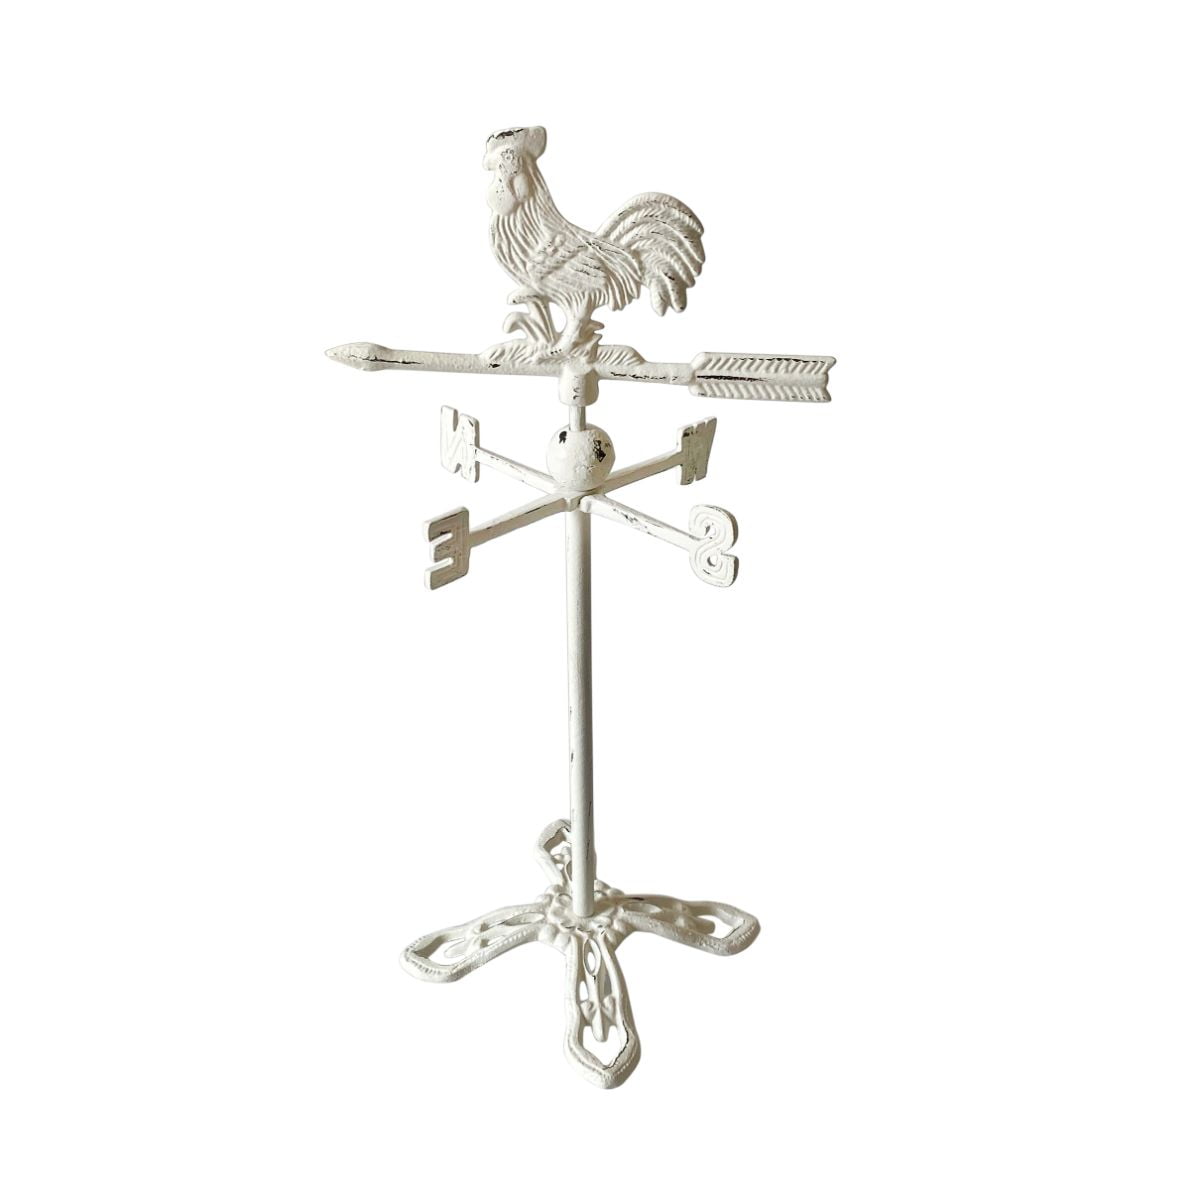 3 Mailbox Weathervane Weather Vane Topper Top ROOSTER Metal Cut out Yard Art 